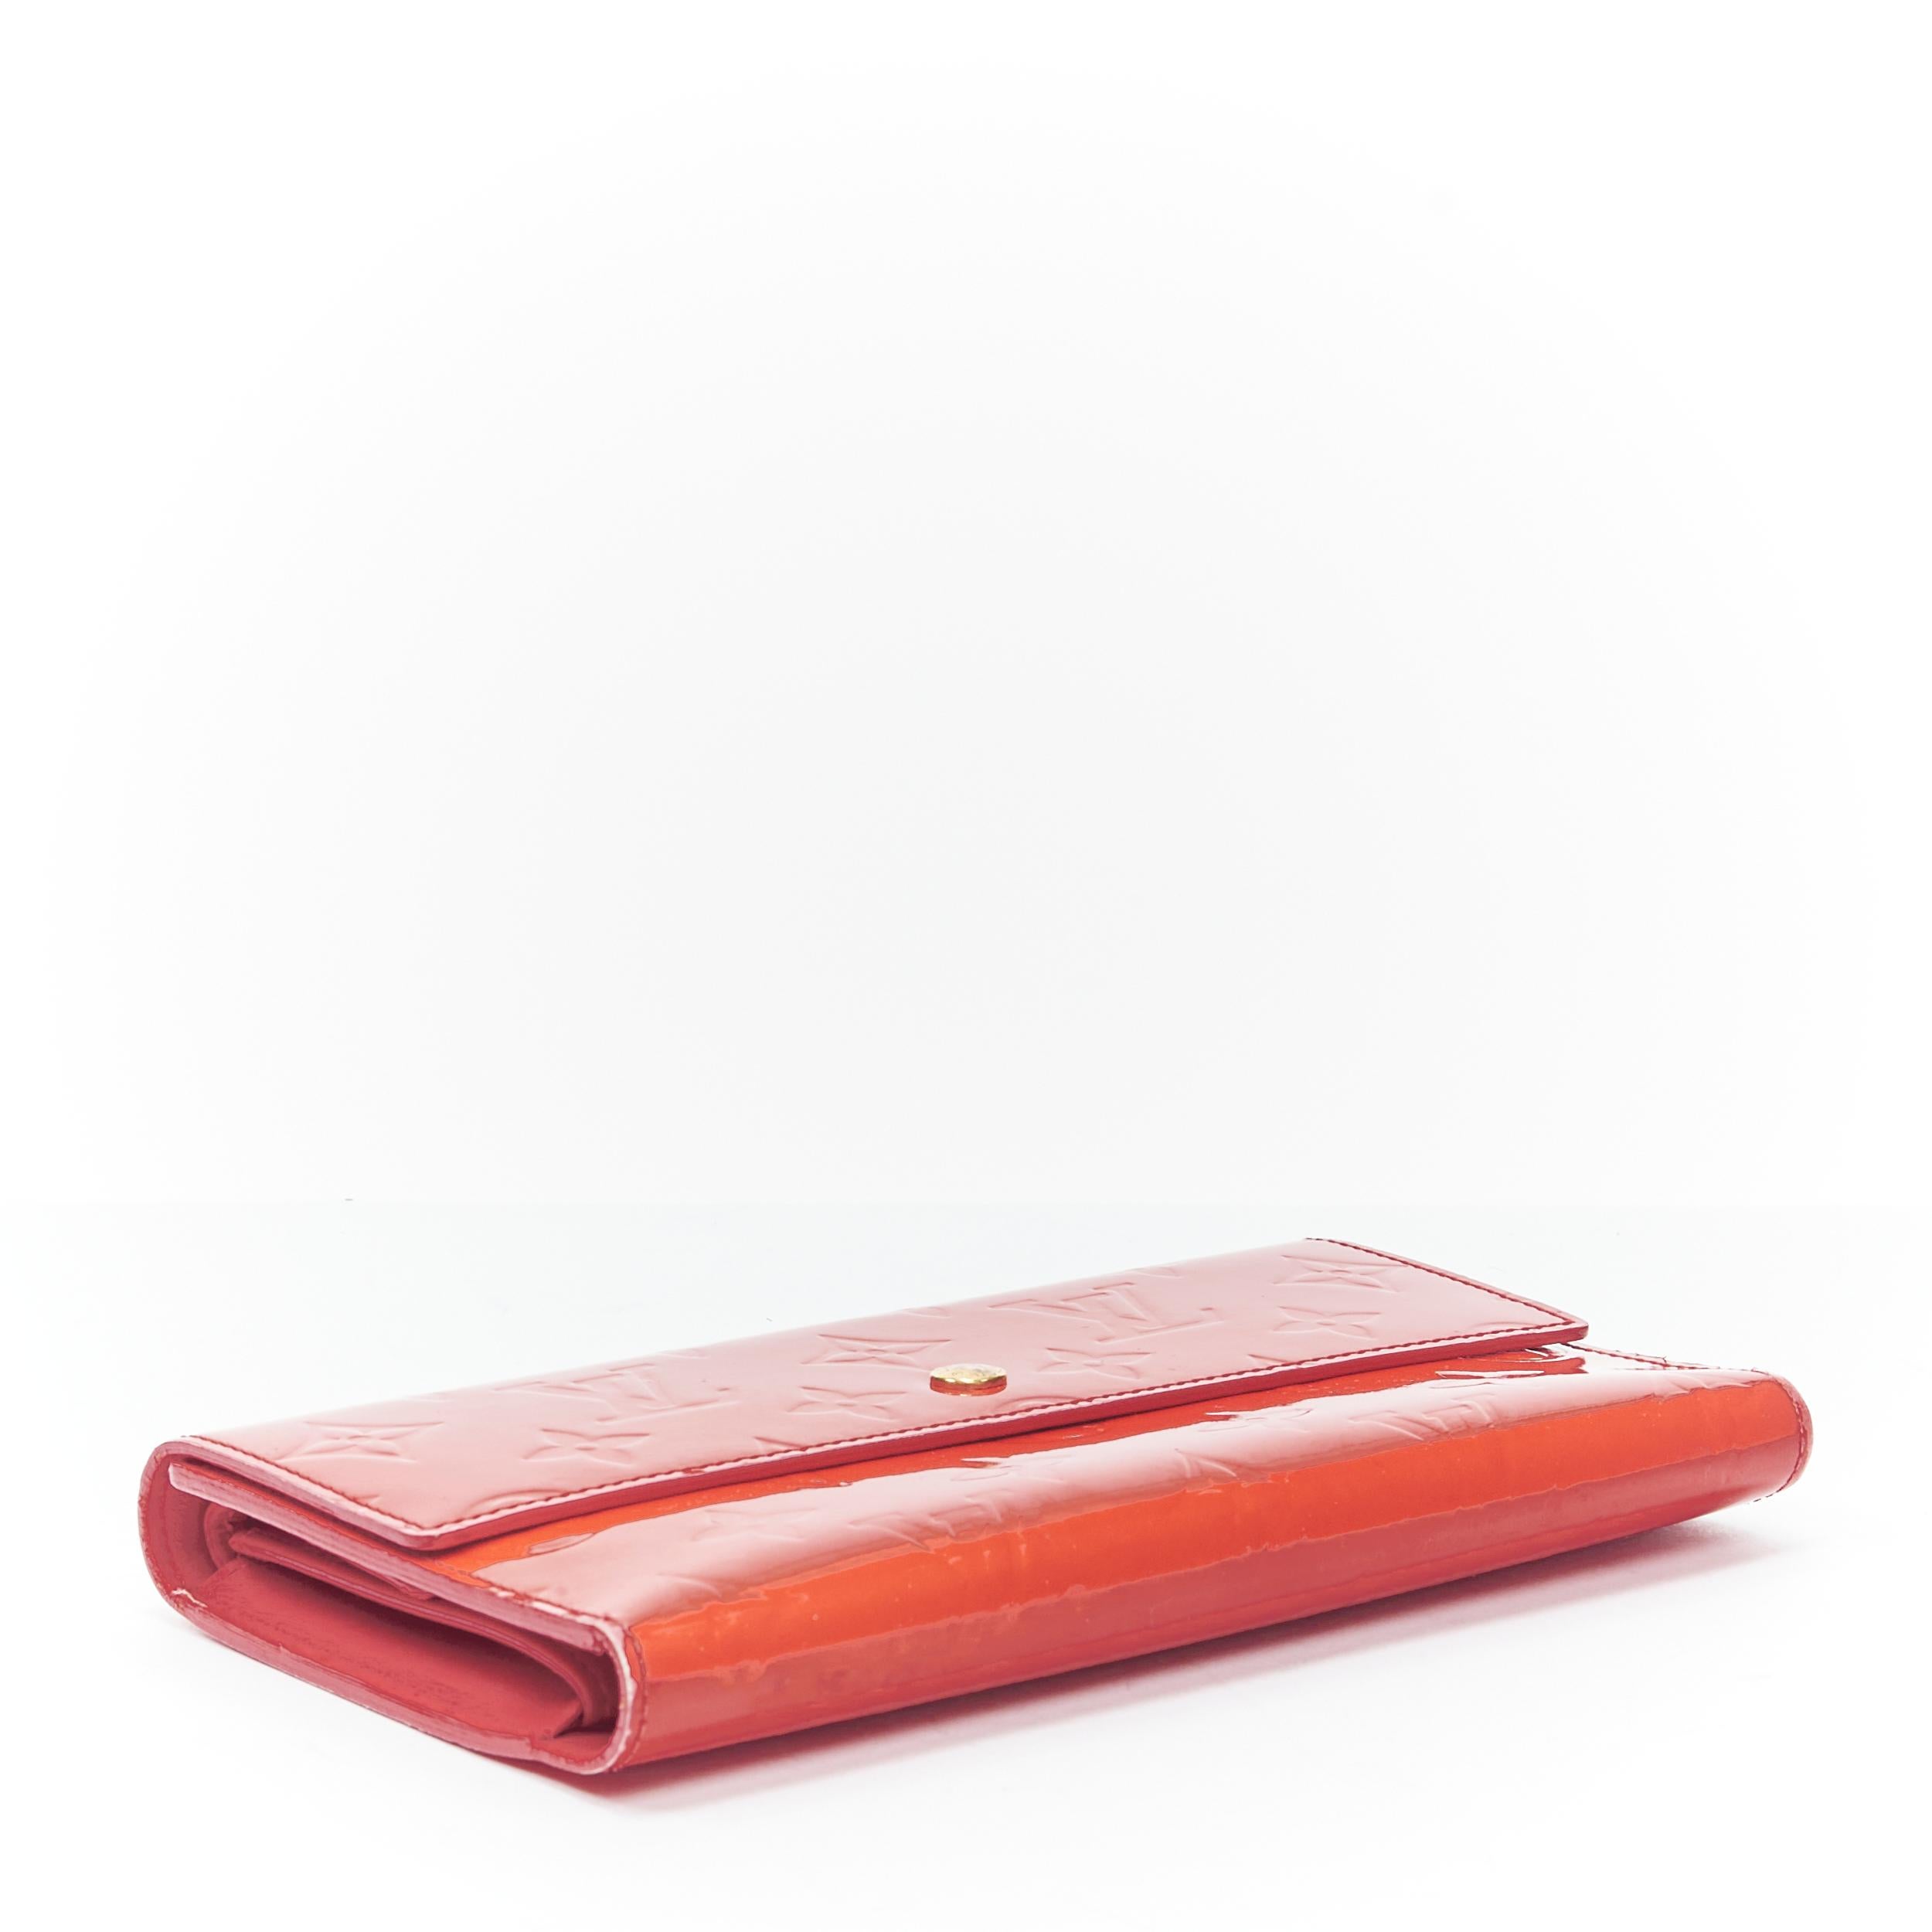 LOUIS VUITTON Vernis red patent LV logo emboss flap continental wallet 
Reference: TGAS/B01410 
Brand: Louis Vuitton 
Material: Patent Leather 
Color: Red 
Pattern: Solid 
Closure: Button 
Extra Detail: Red vernis patent. Monogram emboss. Gold-tone